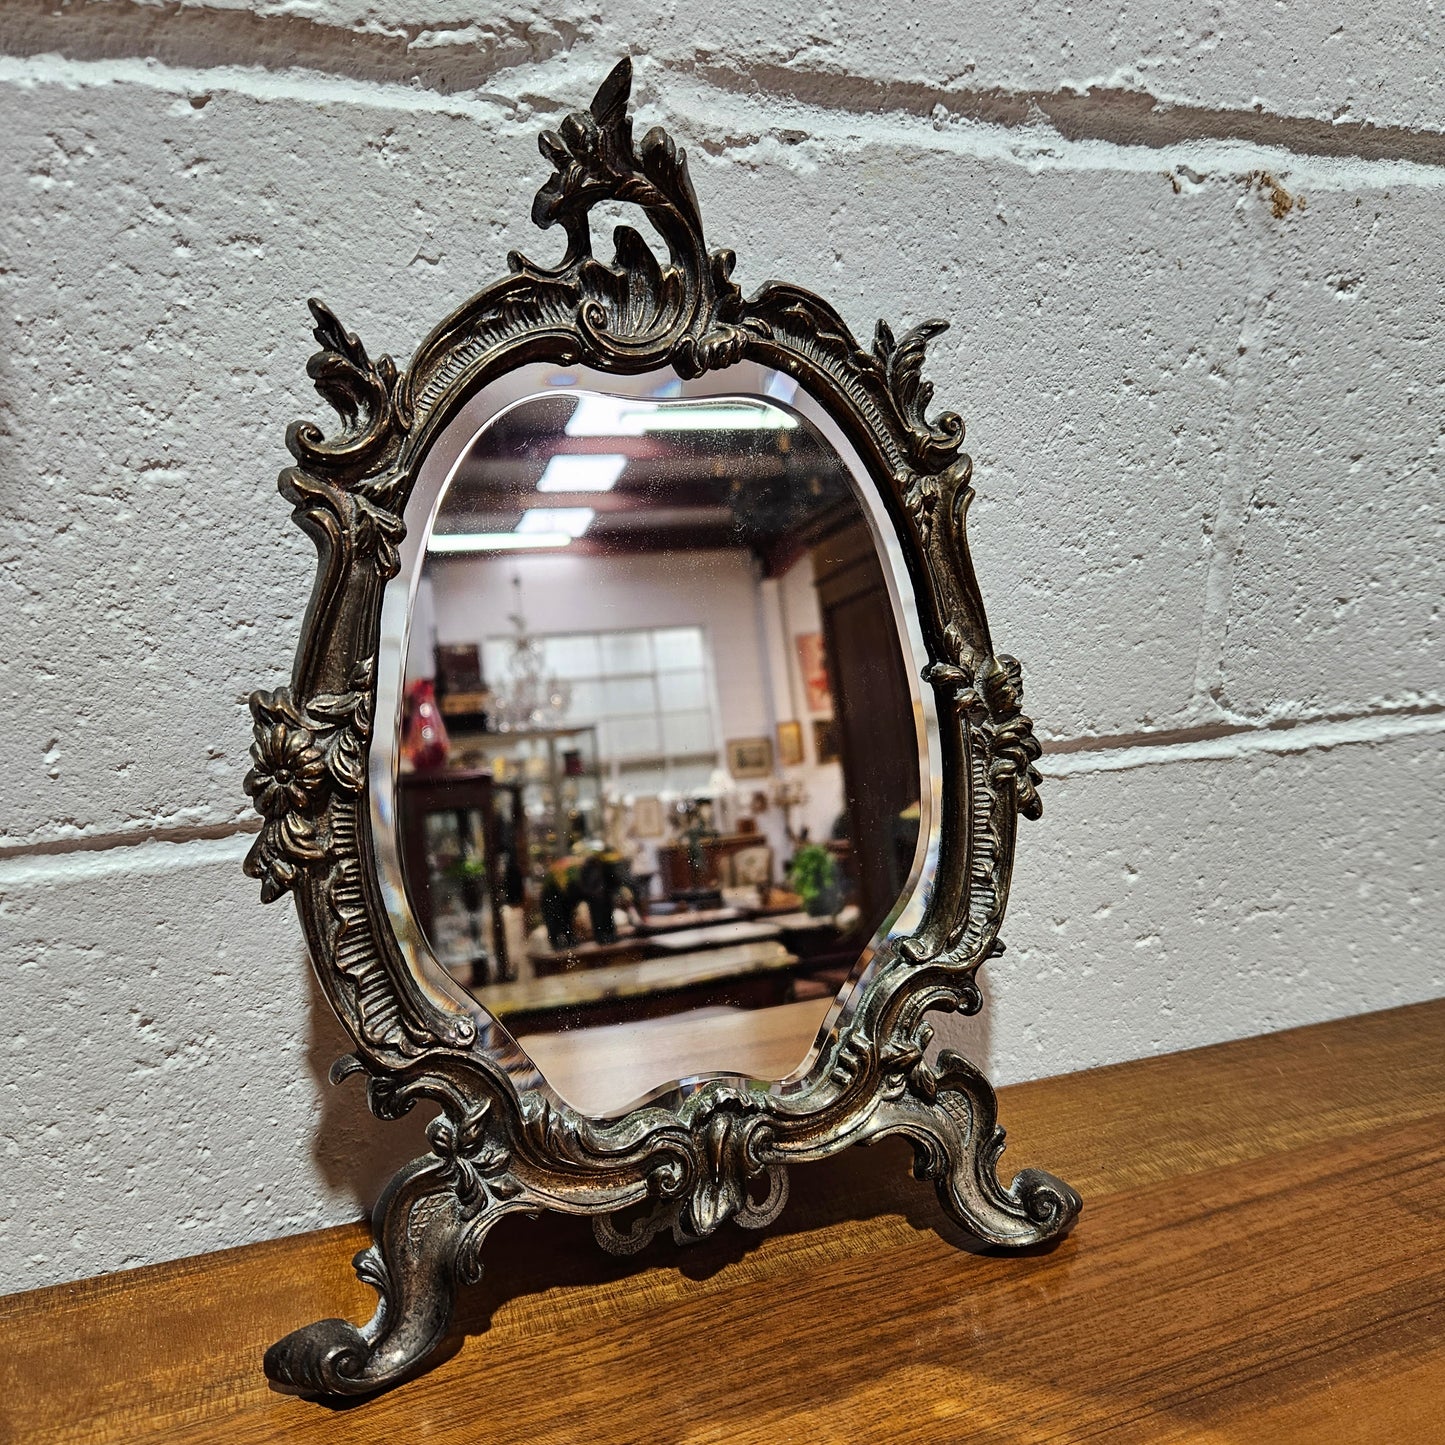 Antique French silver plated dressing table/ desk mirror. In good original condition with beautiful bevelled mirror and nice patina. Please view photos as they help form part of the description.